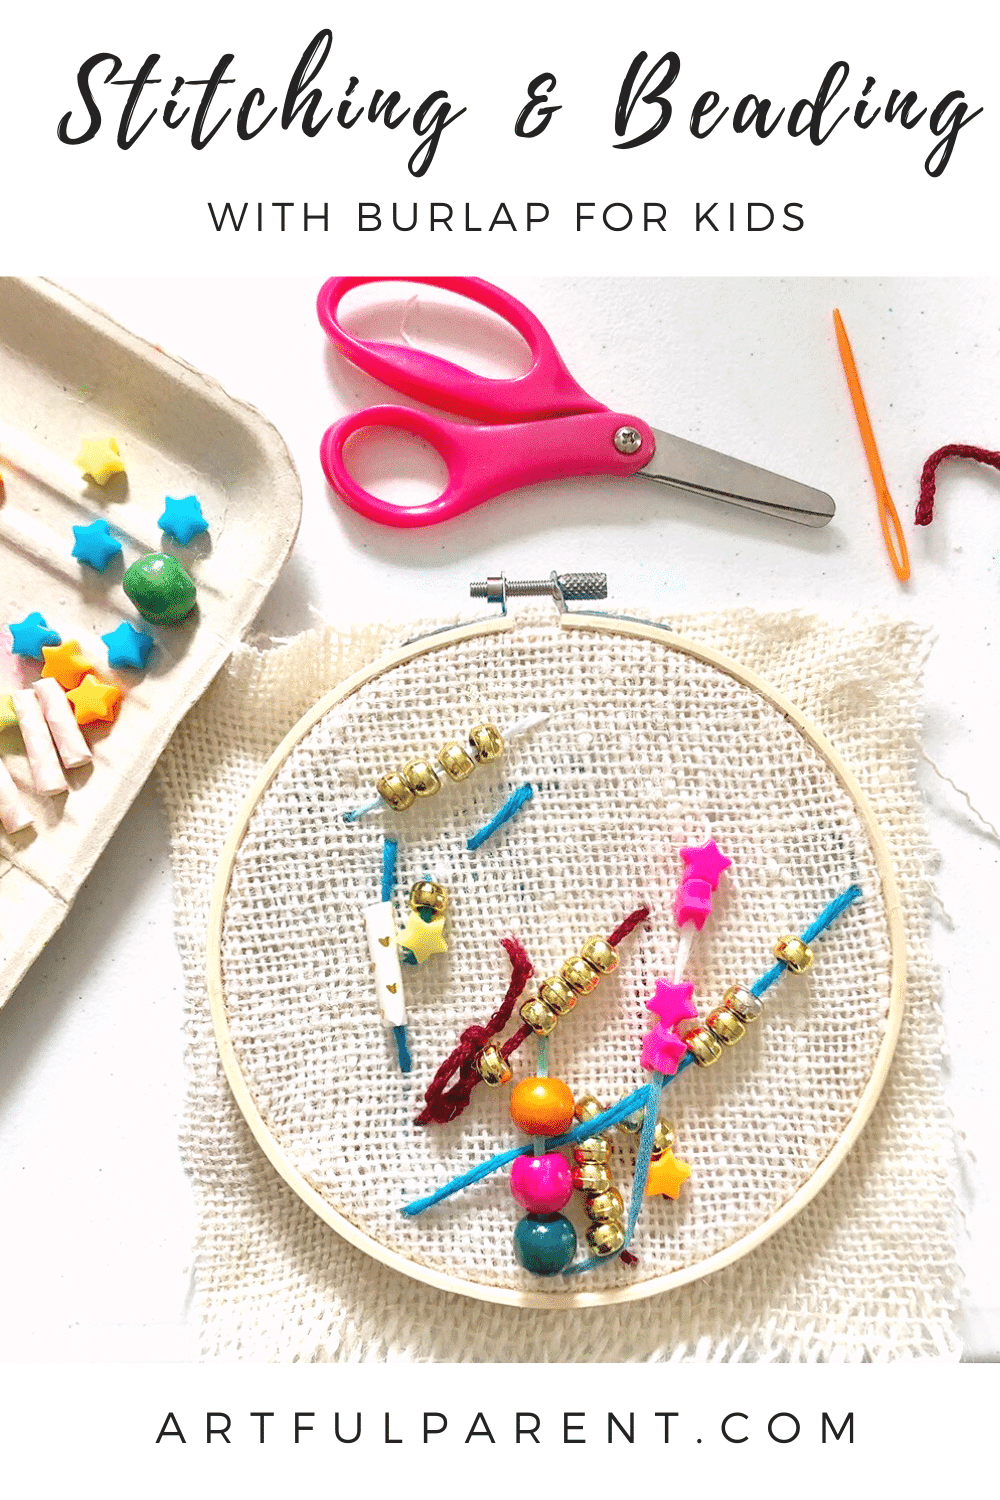 How to Do Simple Stitching for Kids